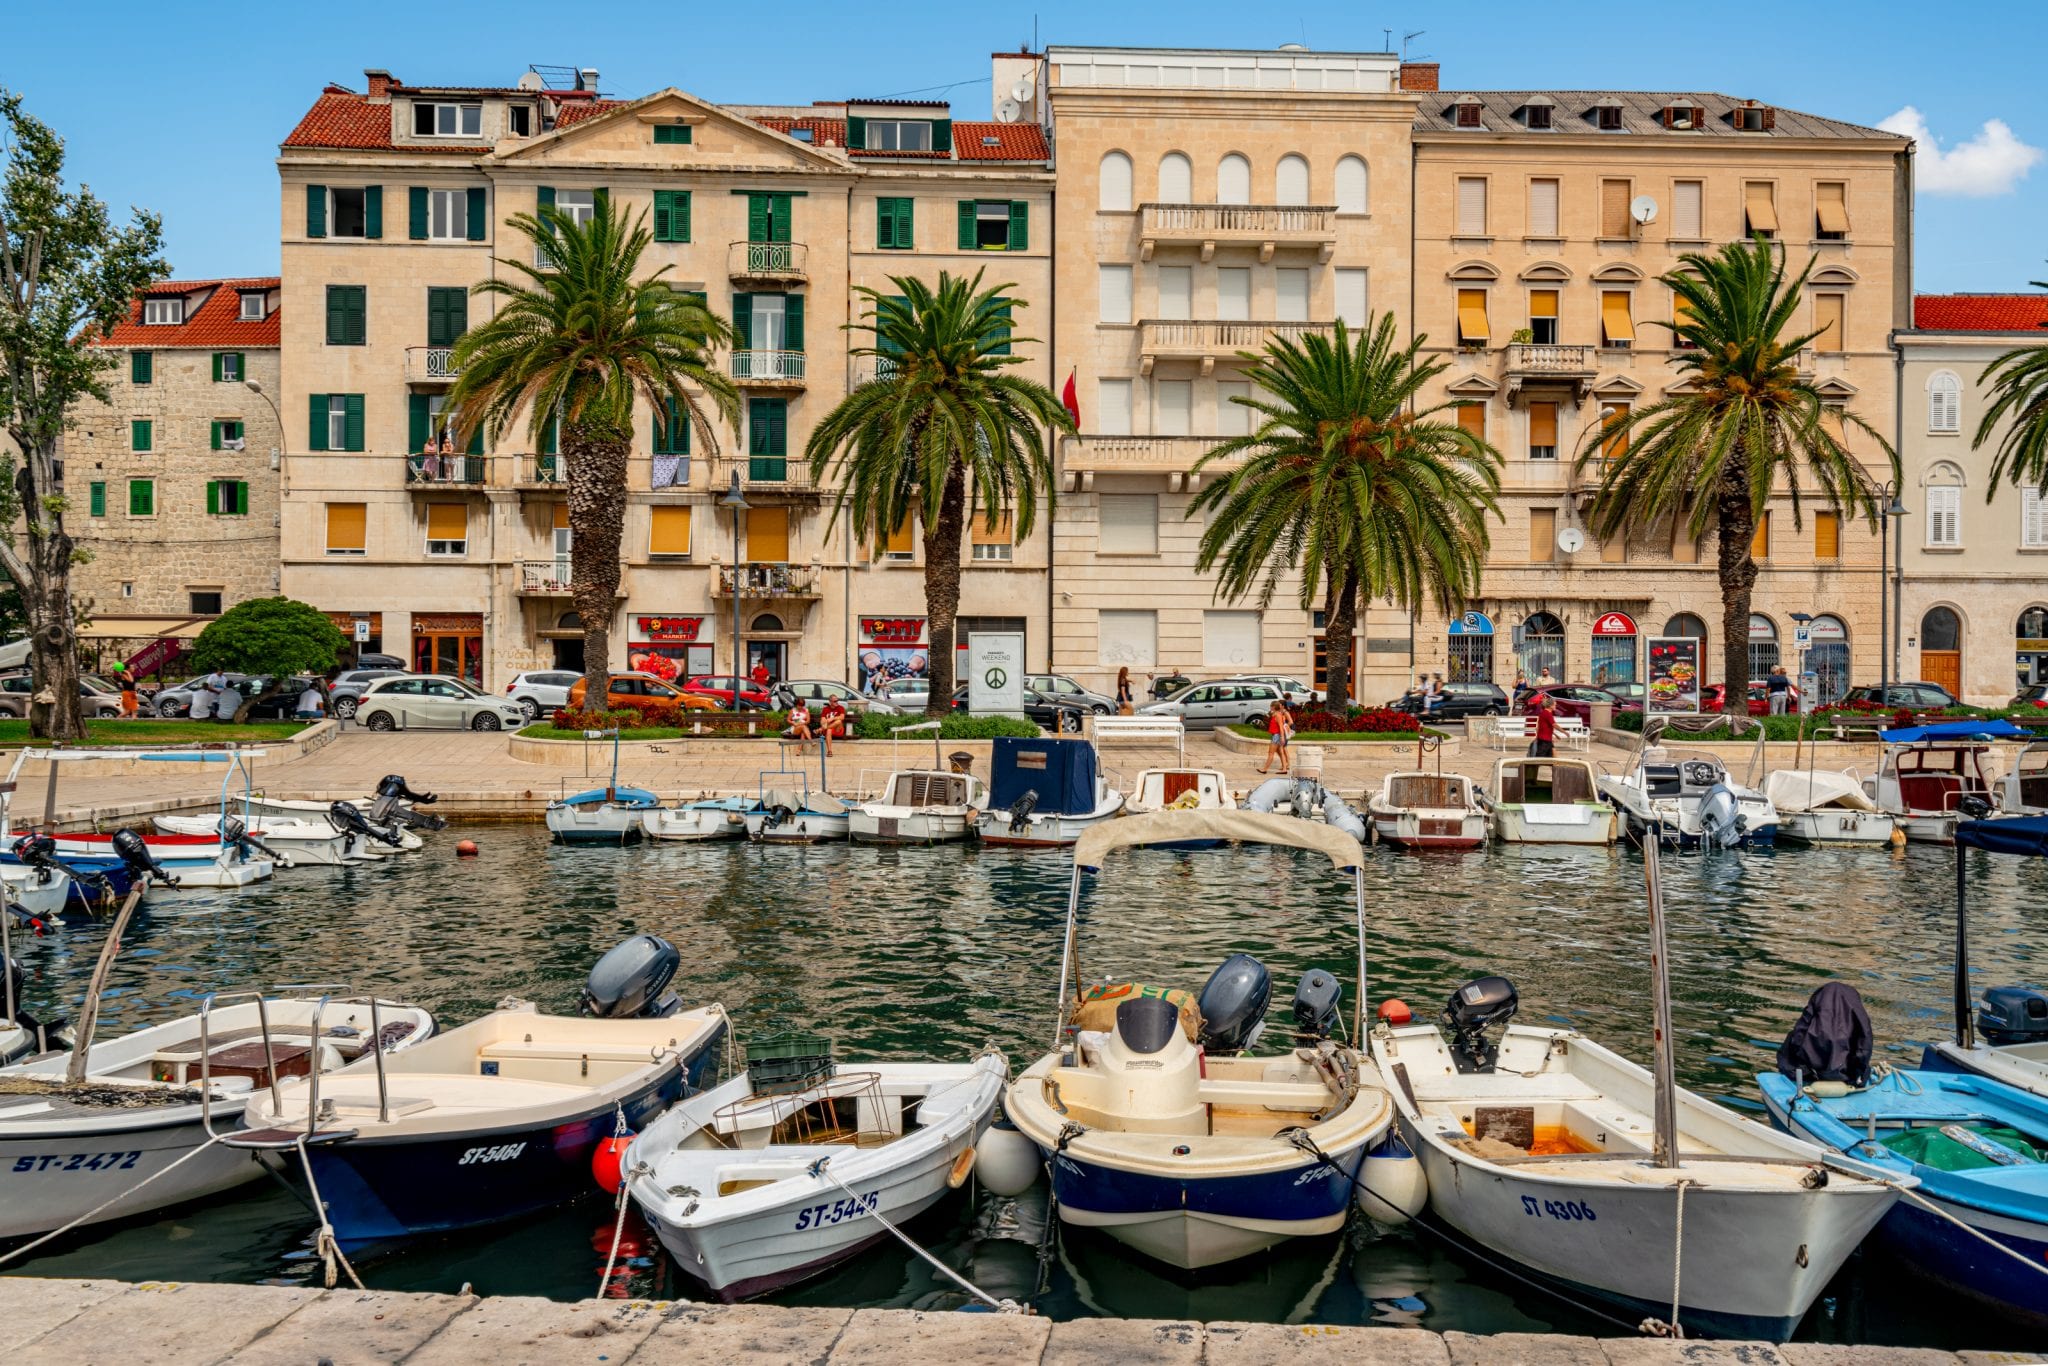 View of Split Croatia Harbor with small boats in the foreground and palm trees in front of buildings in the background